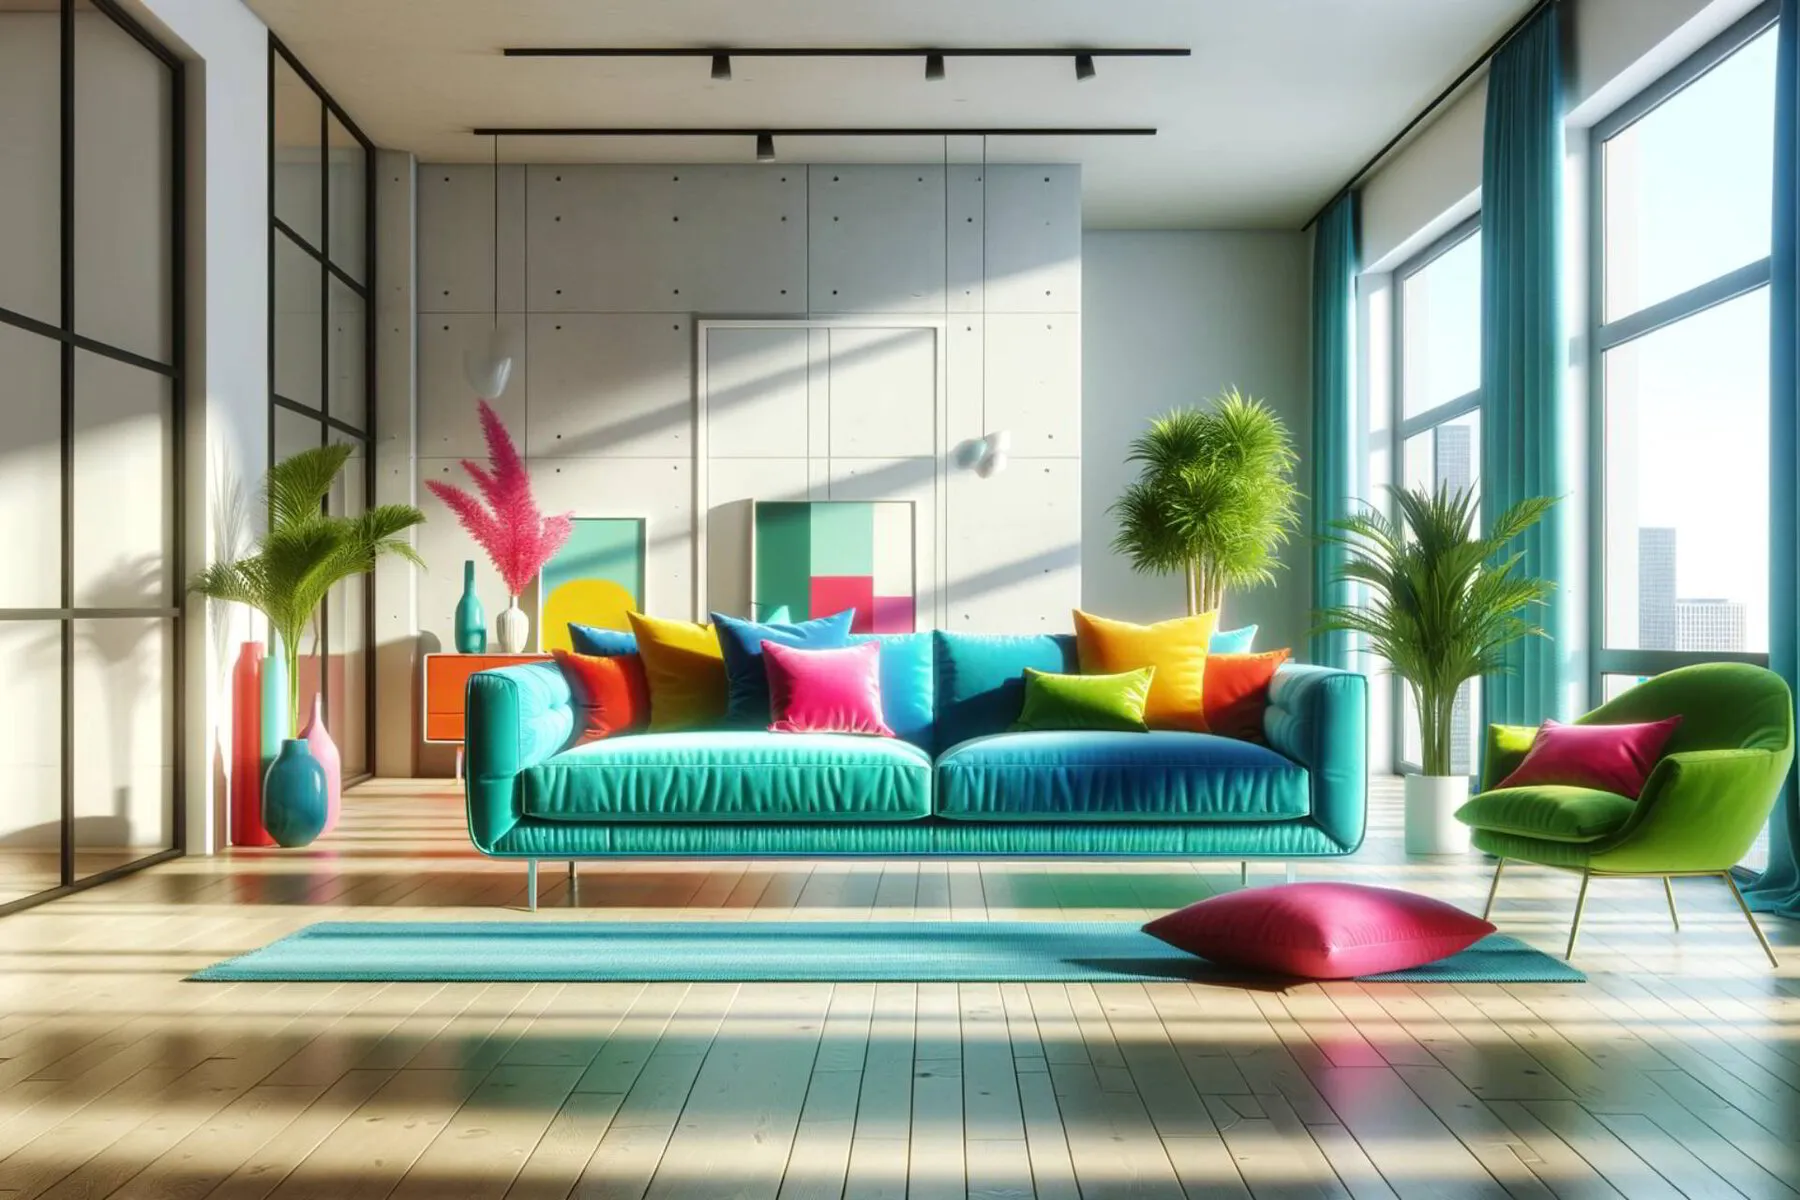 Brightly colored living room adding to the rhythm